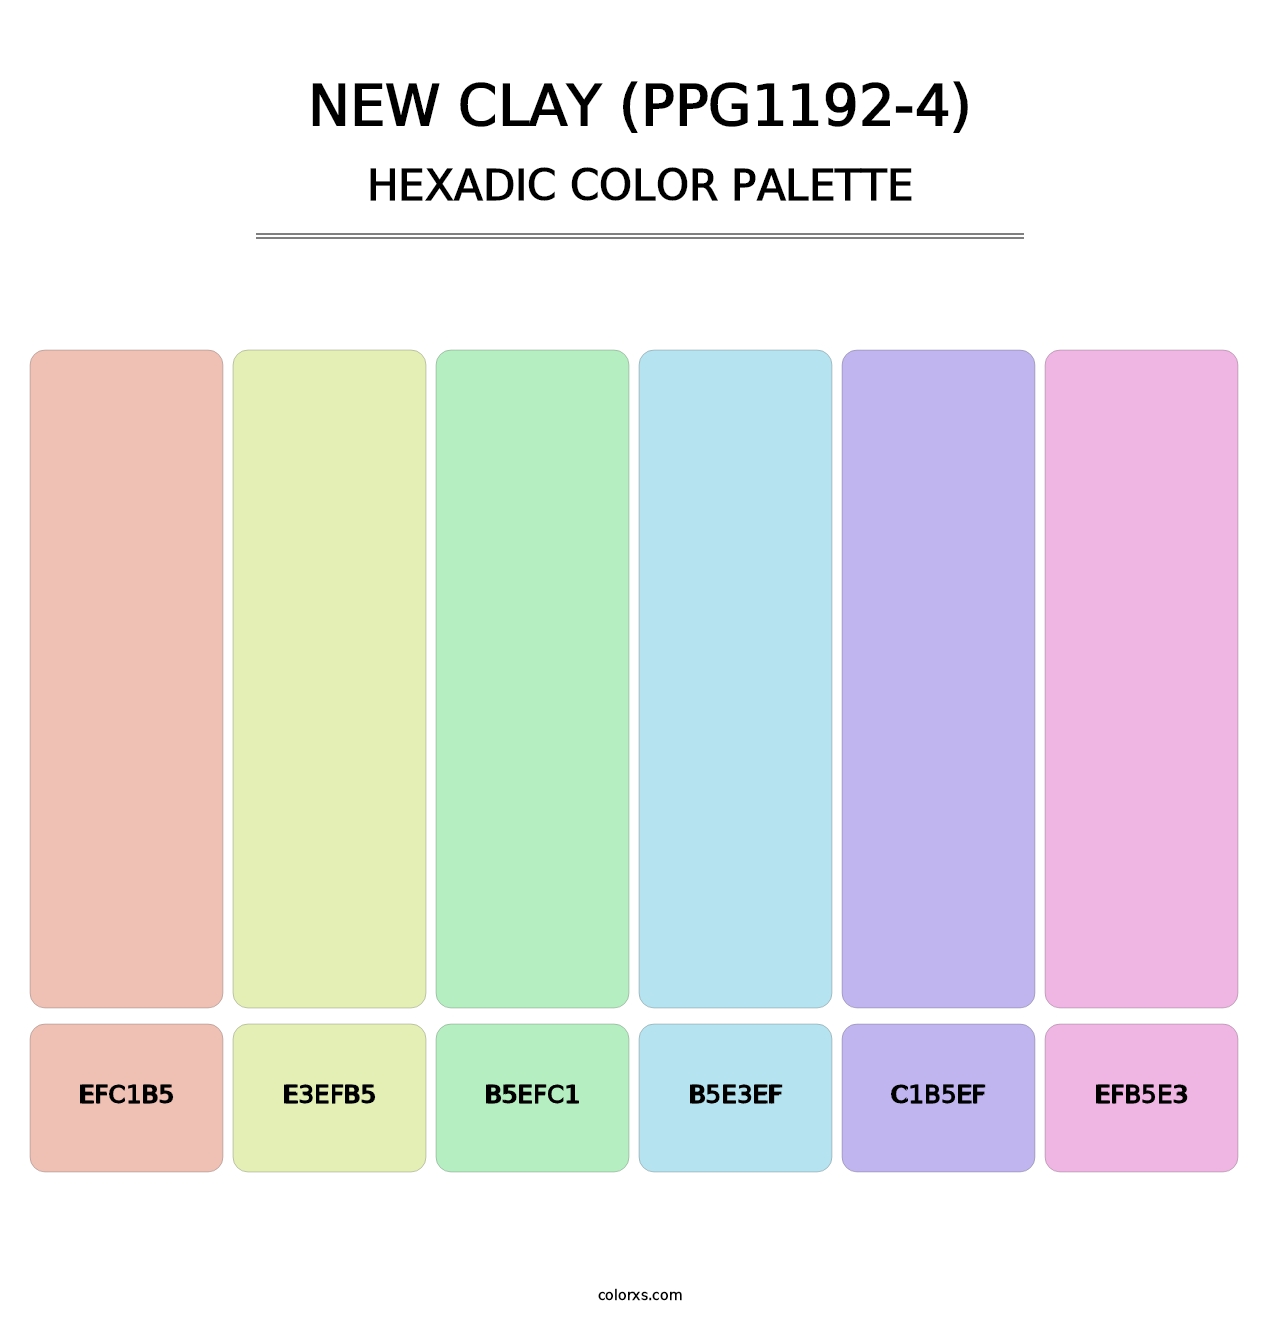 New Clay (PPG1192-4) - Hexadic Color Palette